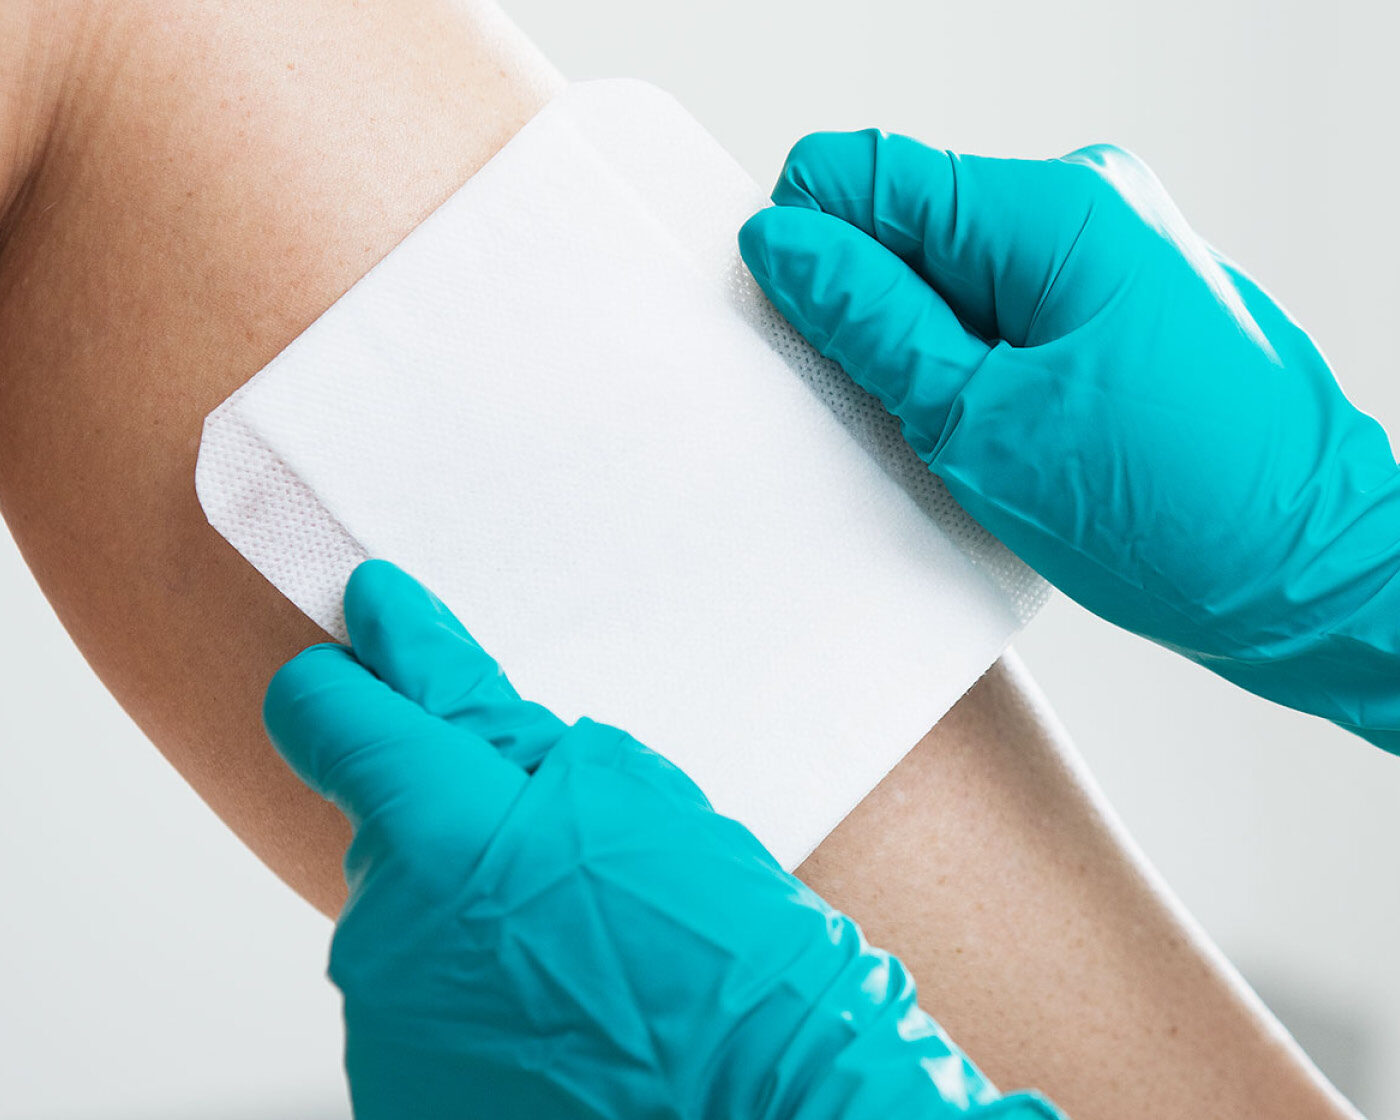 DryMax Super, a sterile superabsorbent wound dressing for compression therapy